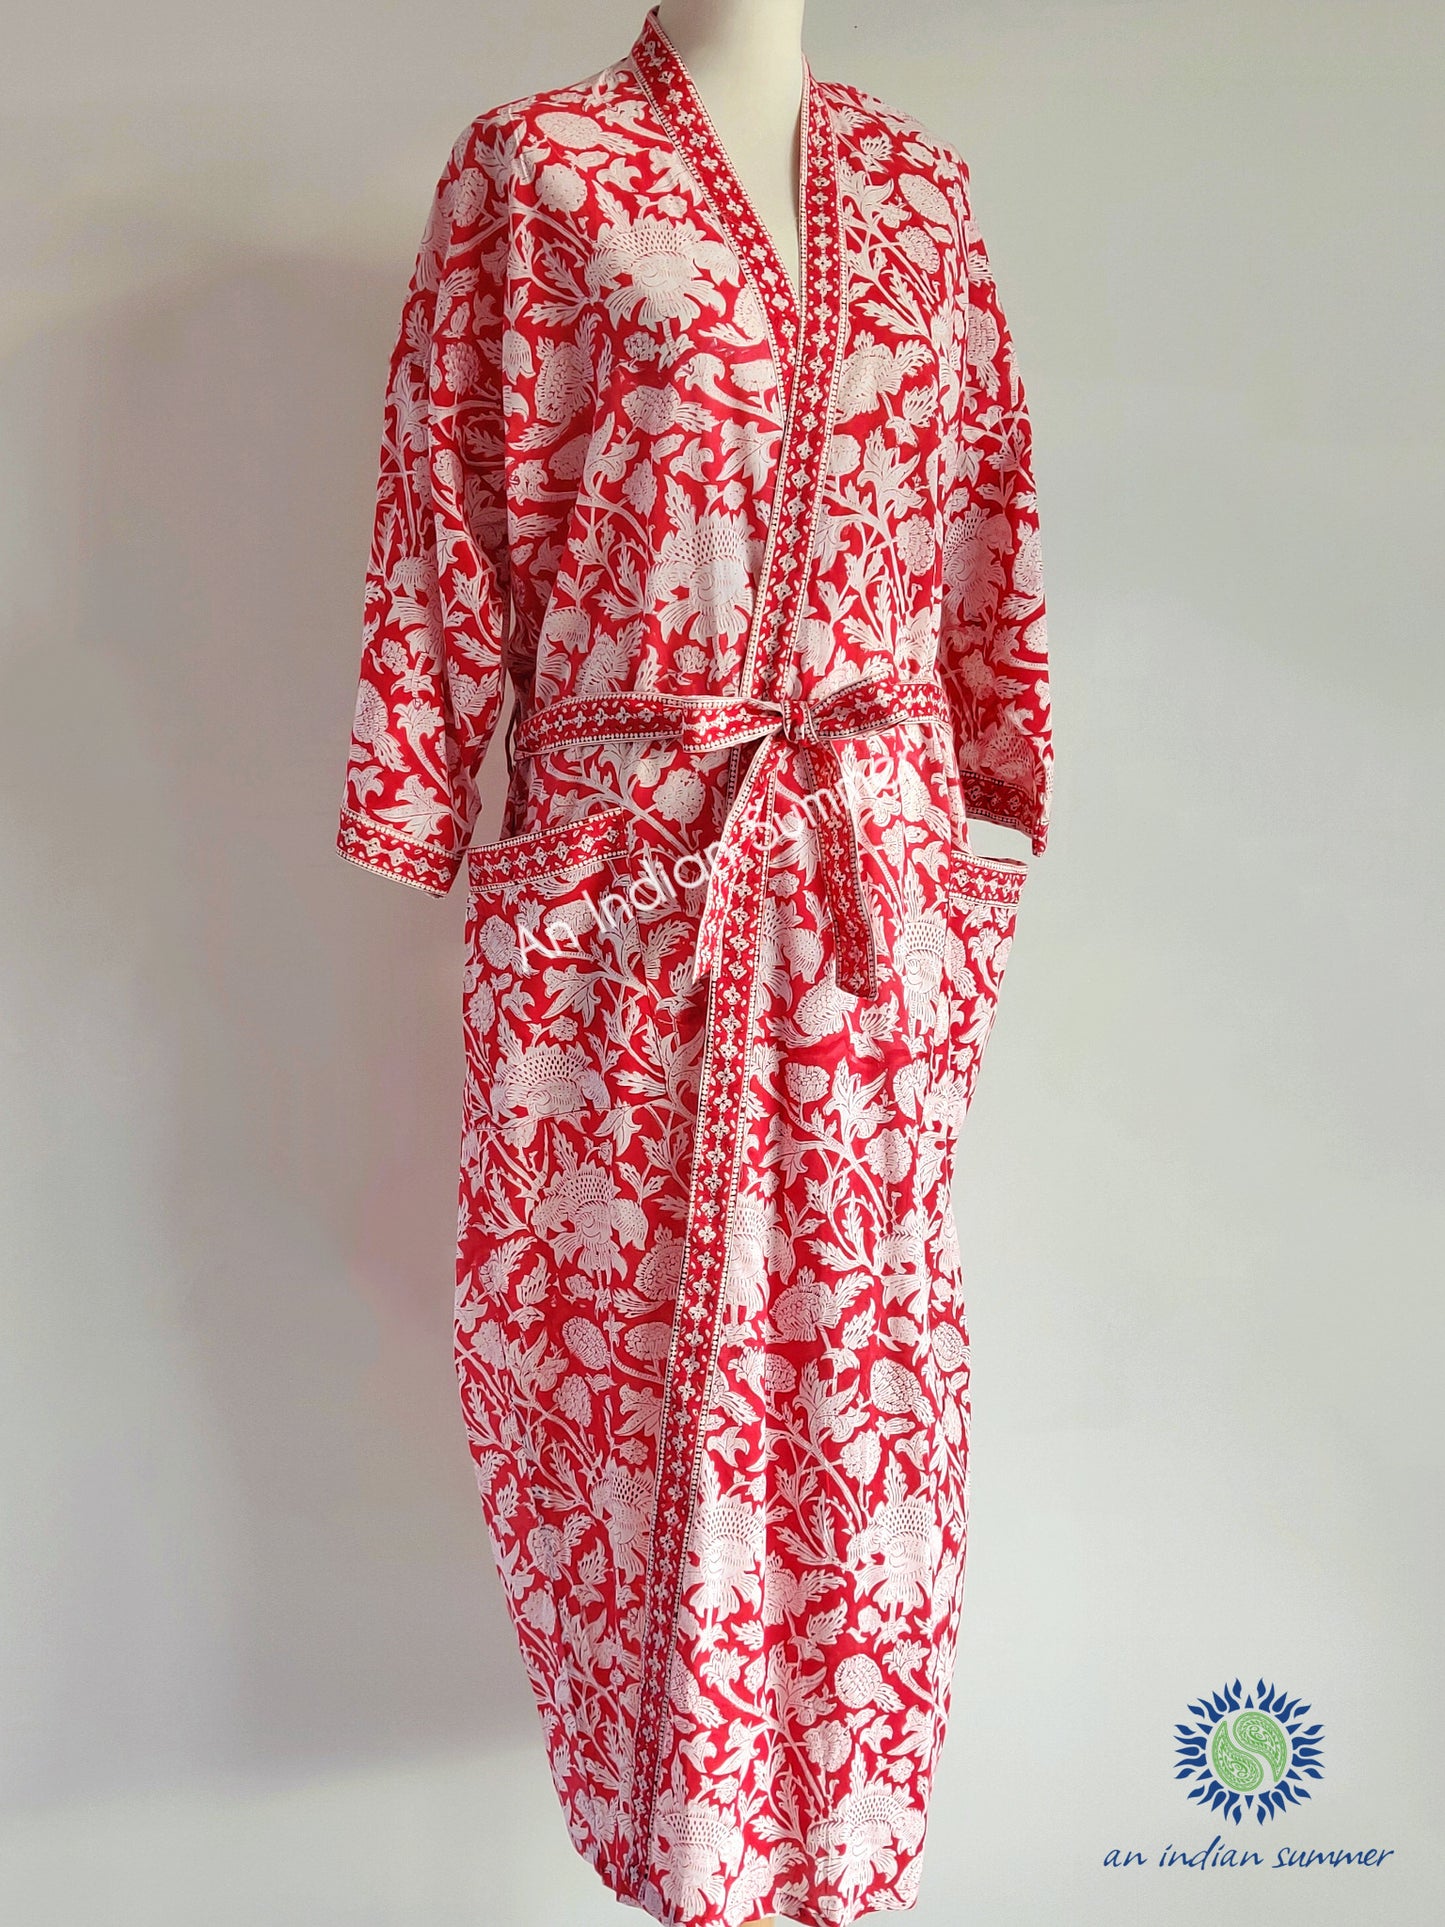 Long Kimono Robe | Thistle | Red | Botanical Block Print | Hand Block Printed | Cotton Voile | An Indian Summer | Seasonless Timeless Sustainable Ethical Authentic Artisan Conscious Clothing Lifestyle Brand